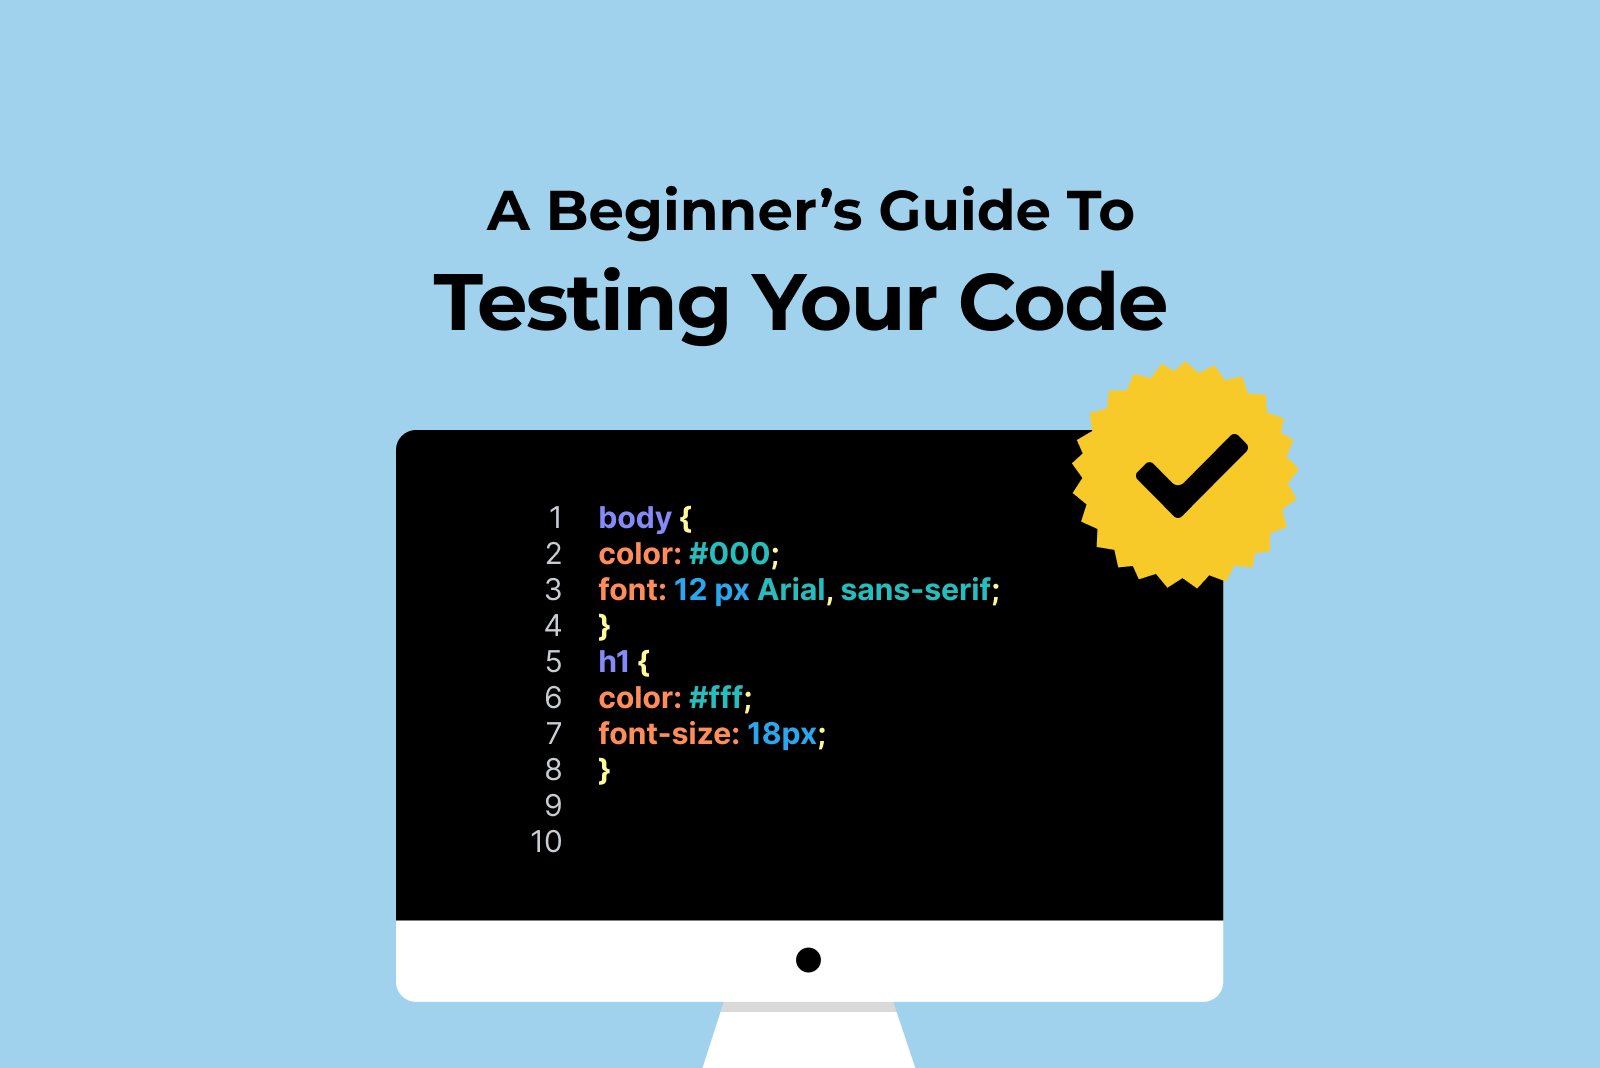 A Beginner's Guide to Testing Your Code